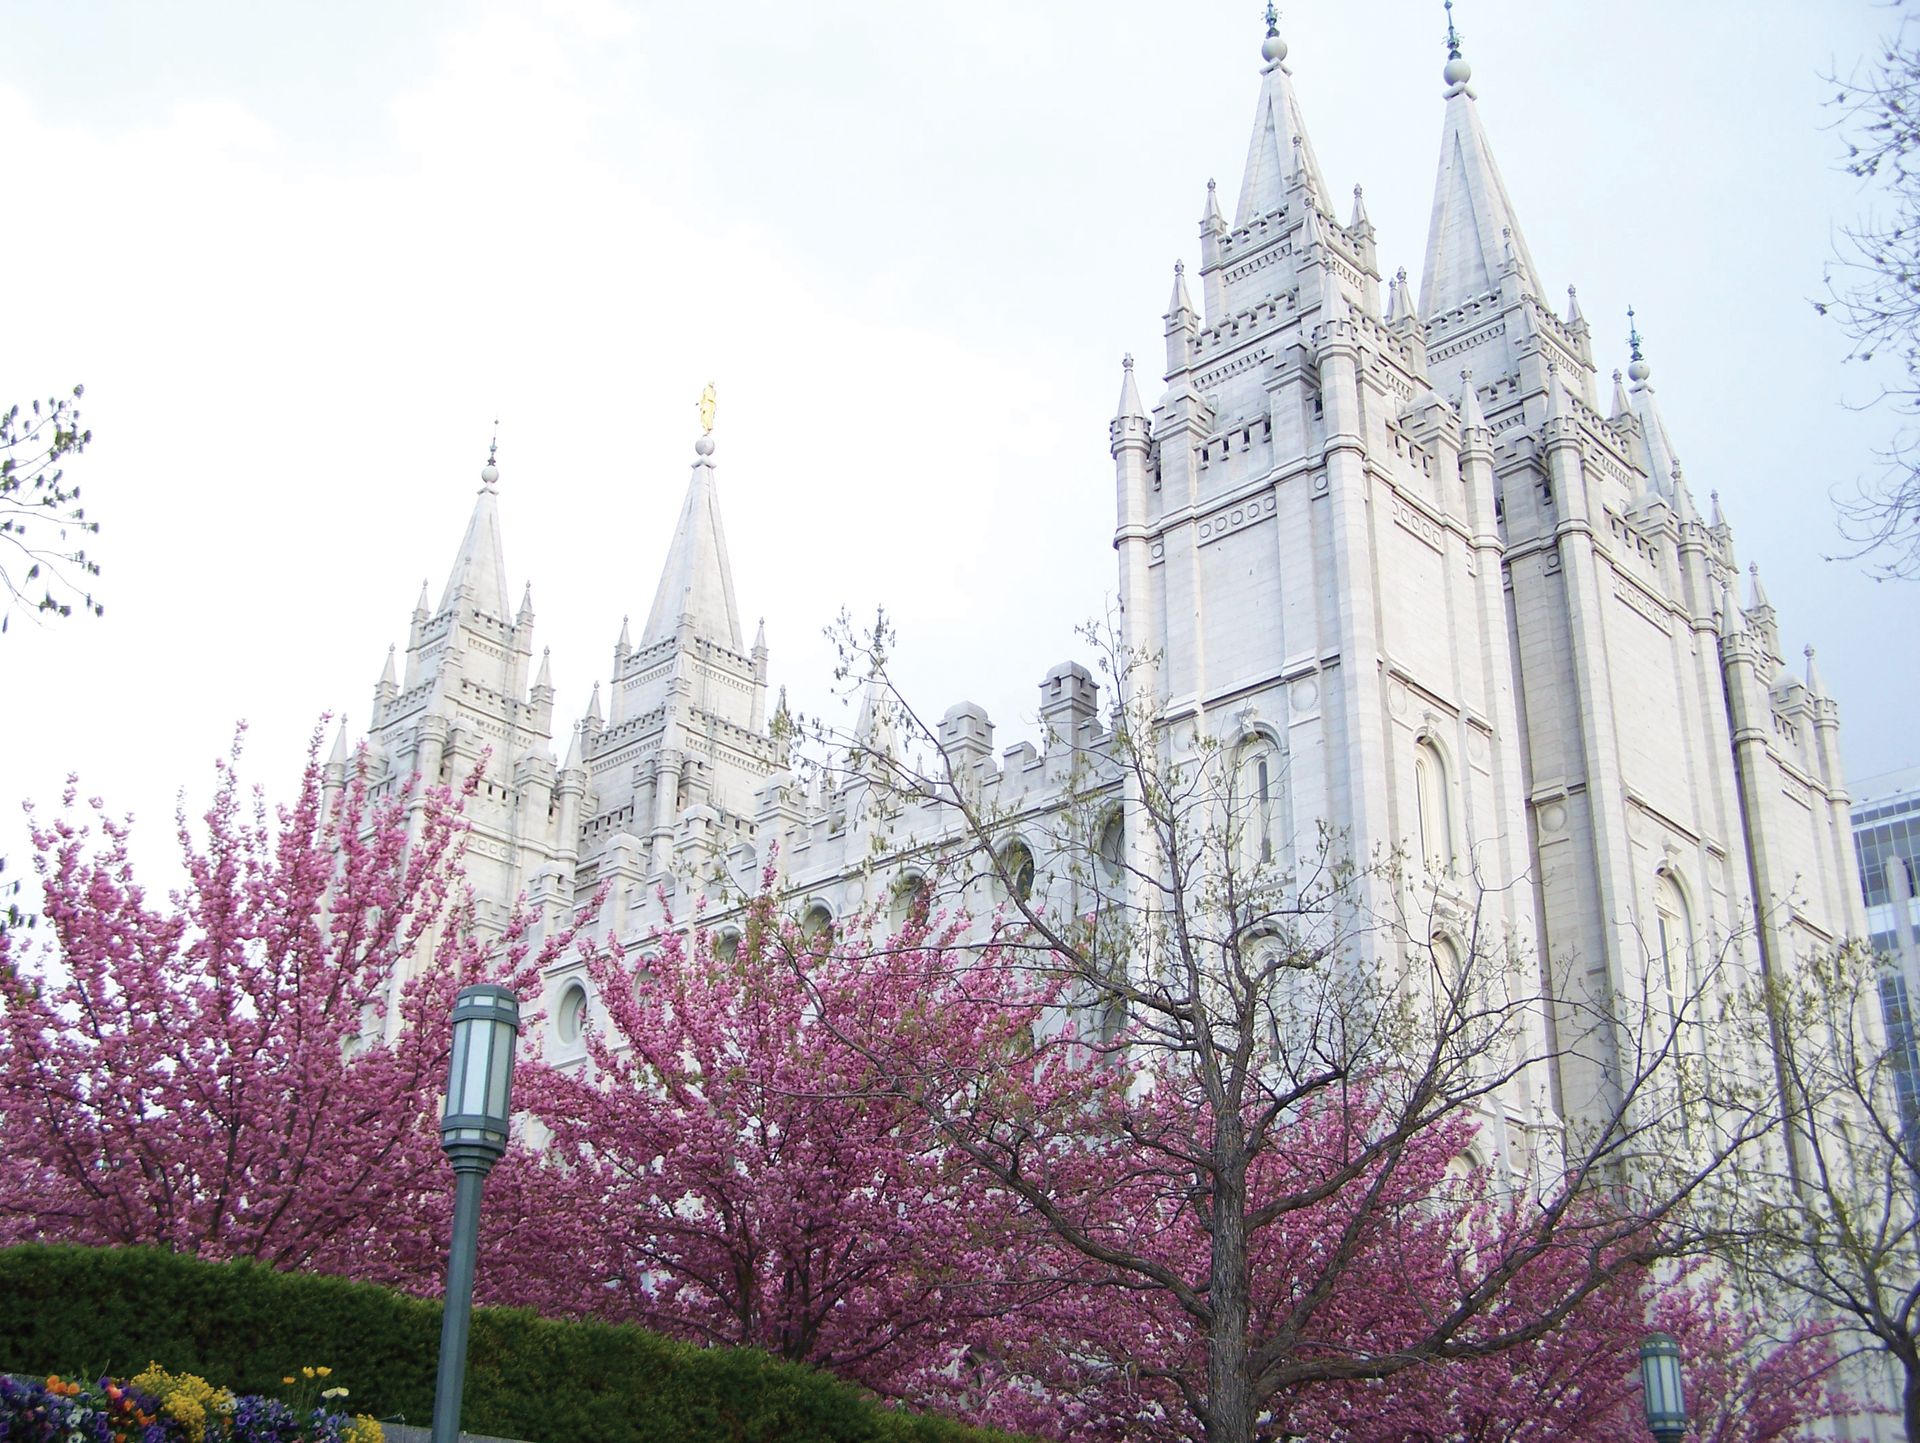 The Salt Lake Temple north view, including scenery.